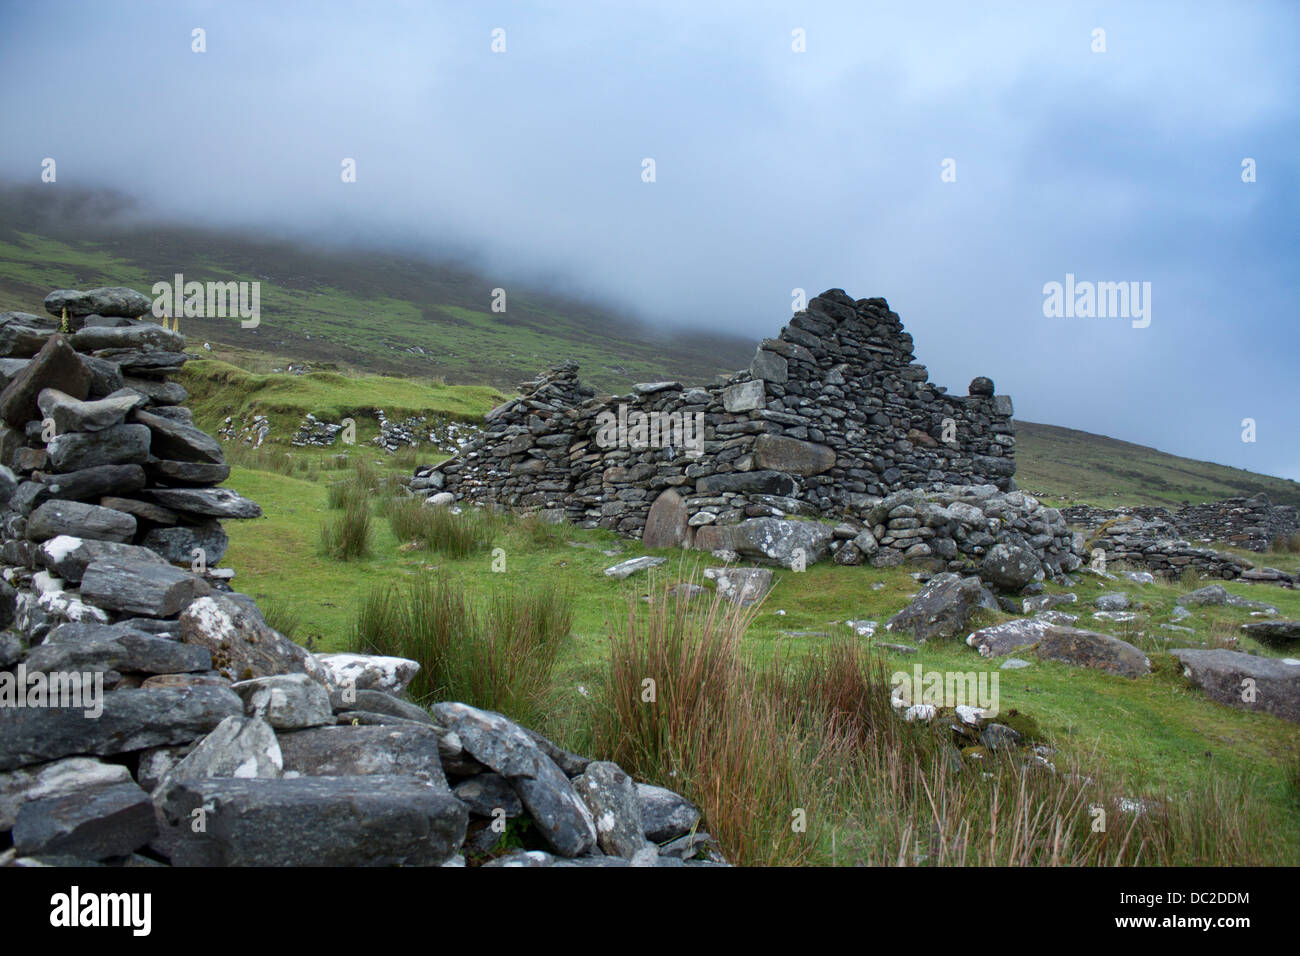 Deserted Village Slievemore Abandoned after Potato Famine in 1850s Achill Island County Mayo Eire Republic of Ireland Stock Photo